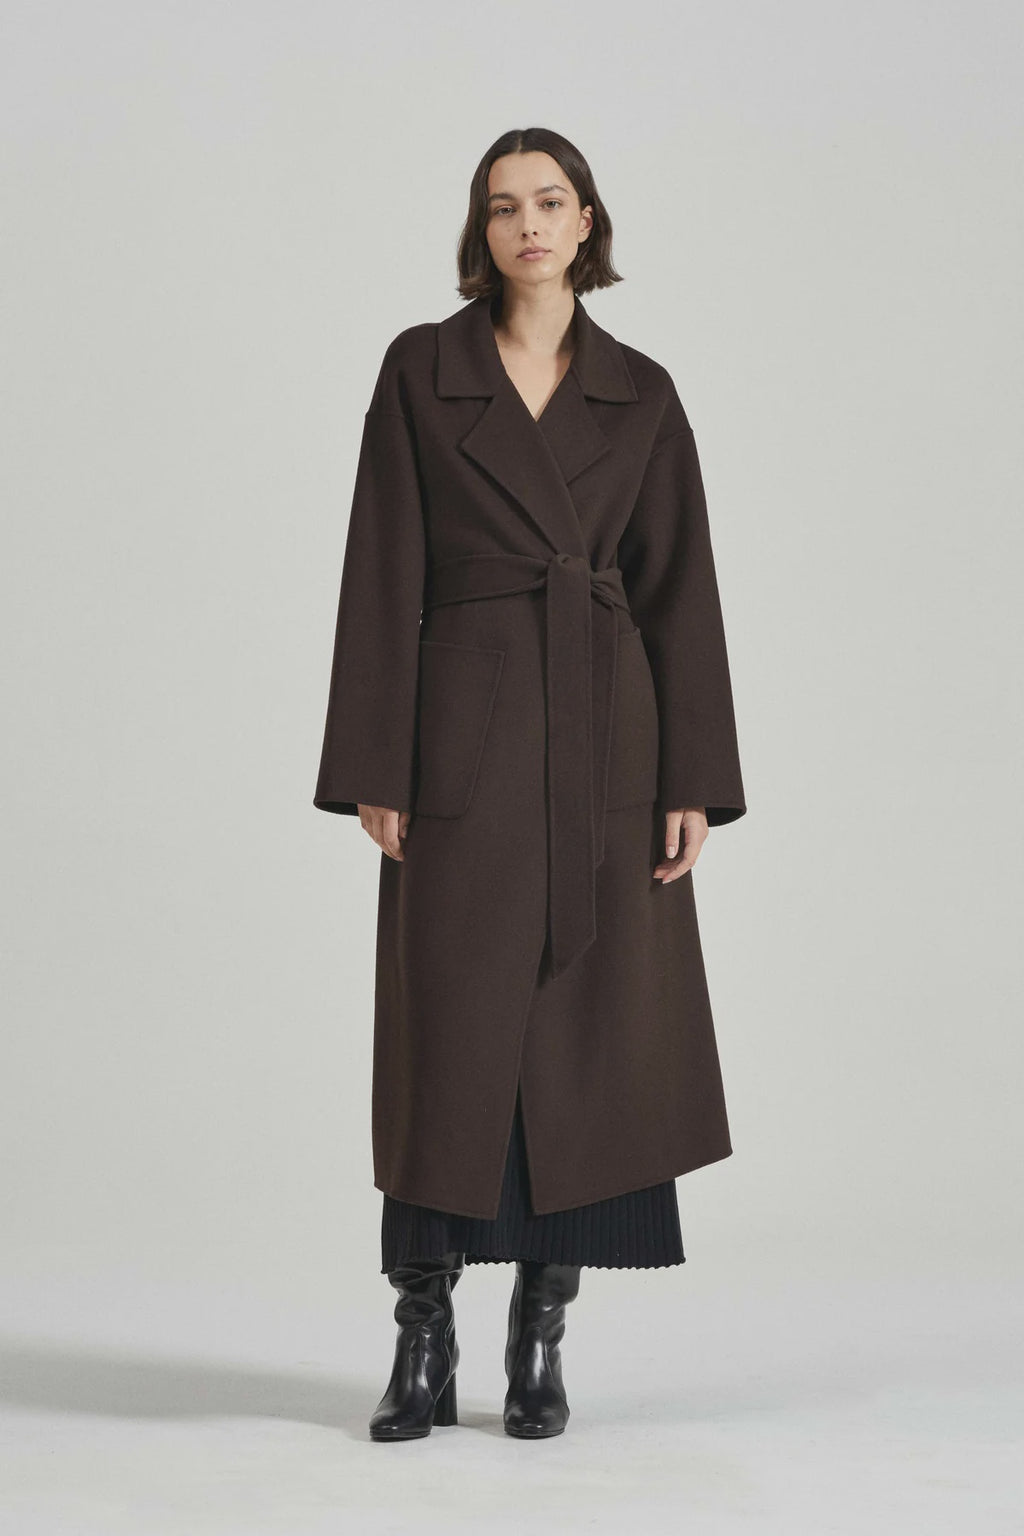 THE CAMILLA COAT - CHOCOLATE - FRIENDS WITH FRANK